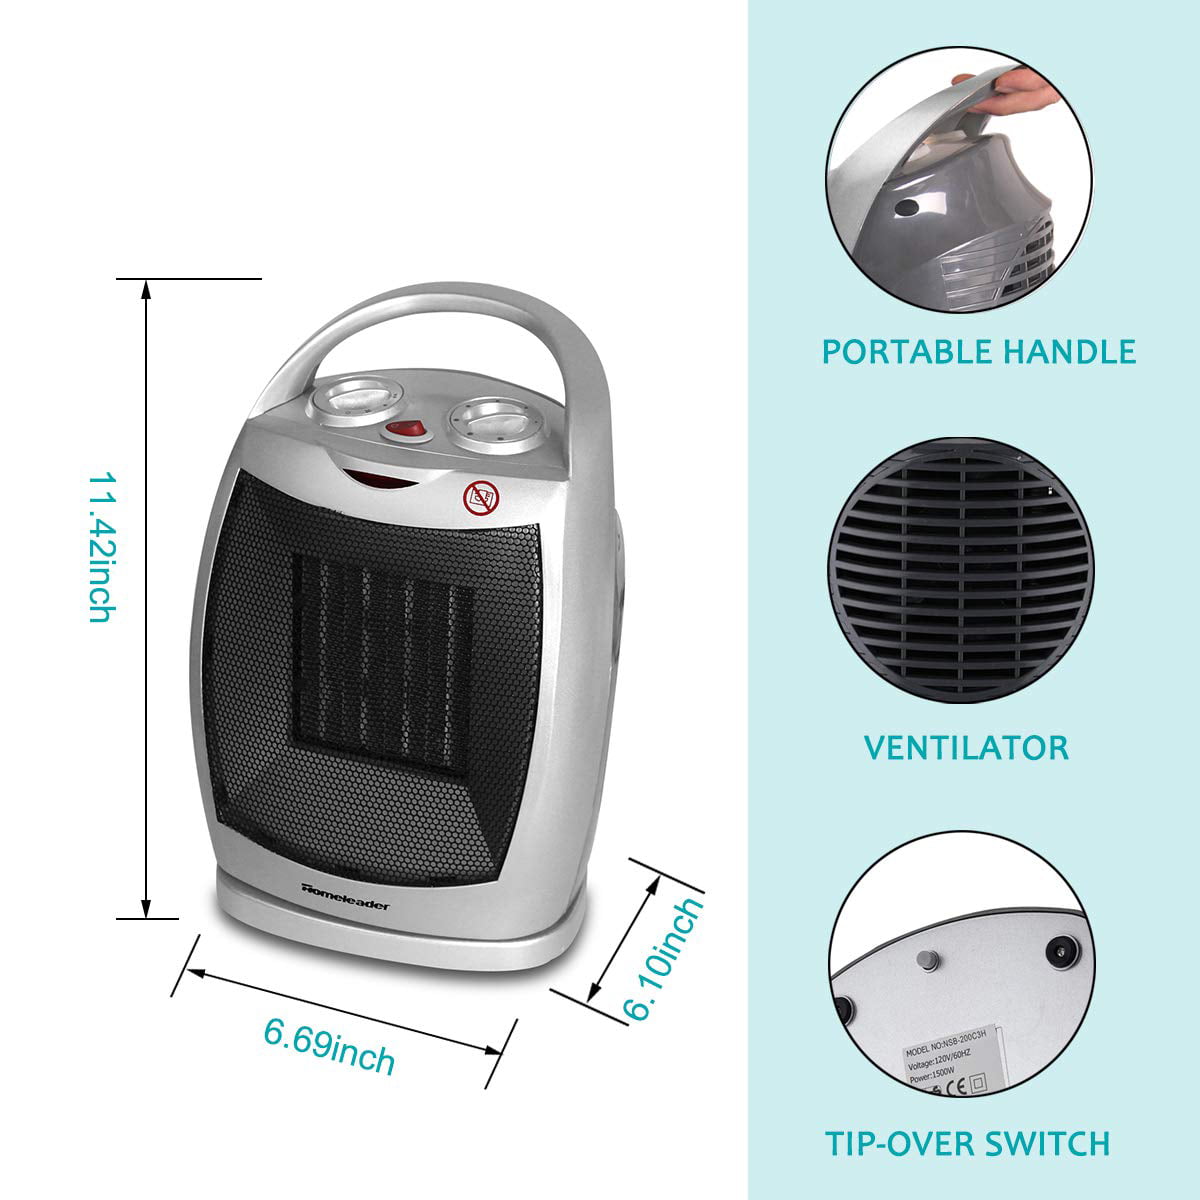 Oscillating Ceramic Portable Heater with Built-in Adjustable Thermostat NSB-200C3H 750W/1500W Homeleader Space Heater 